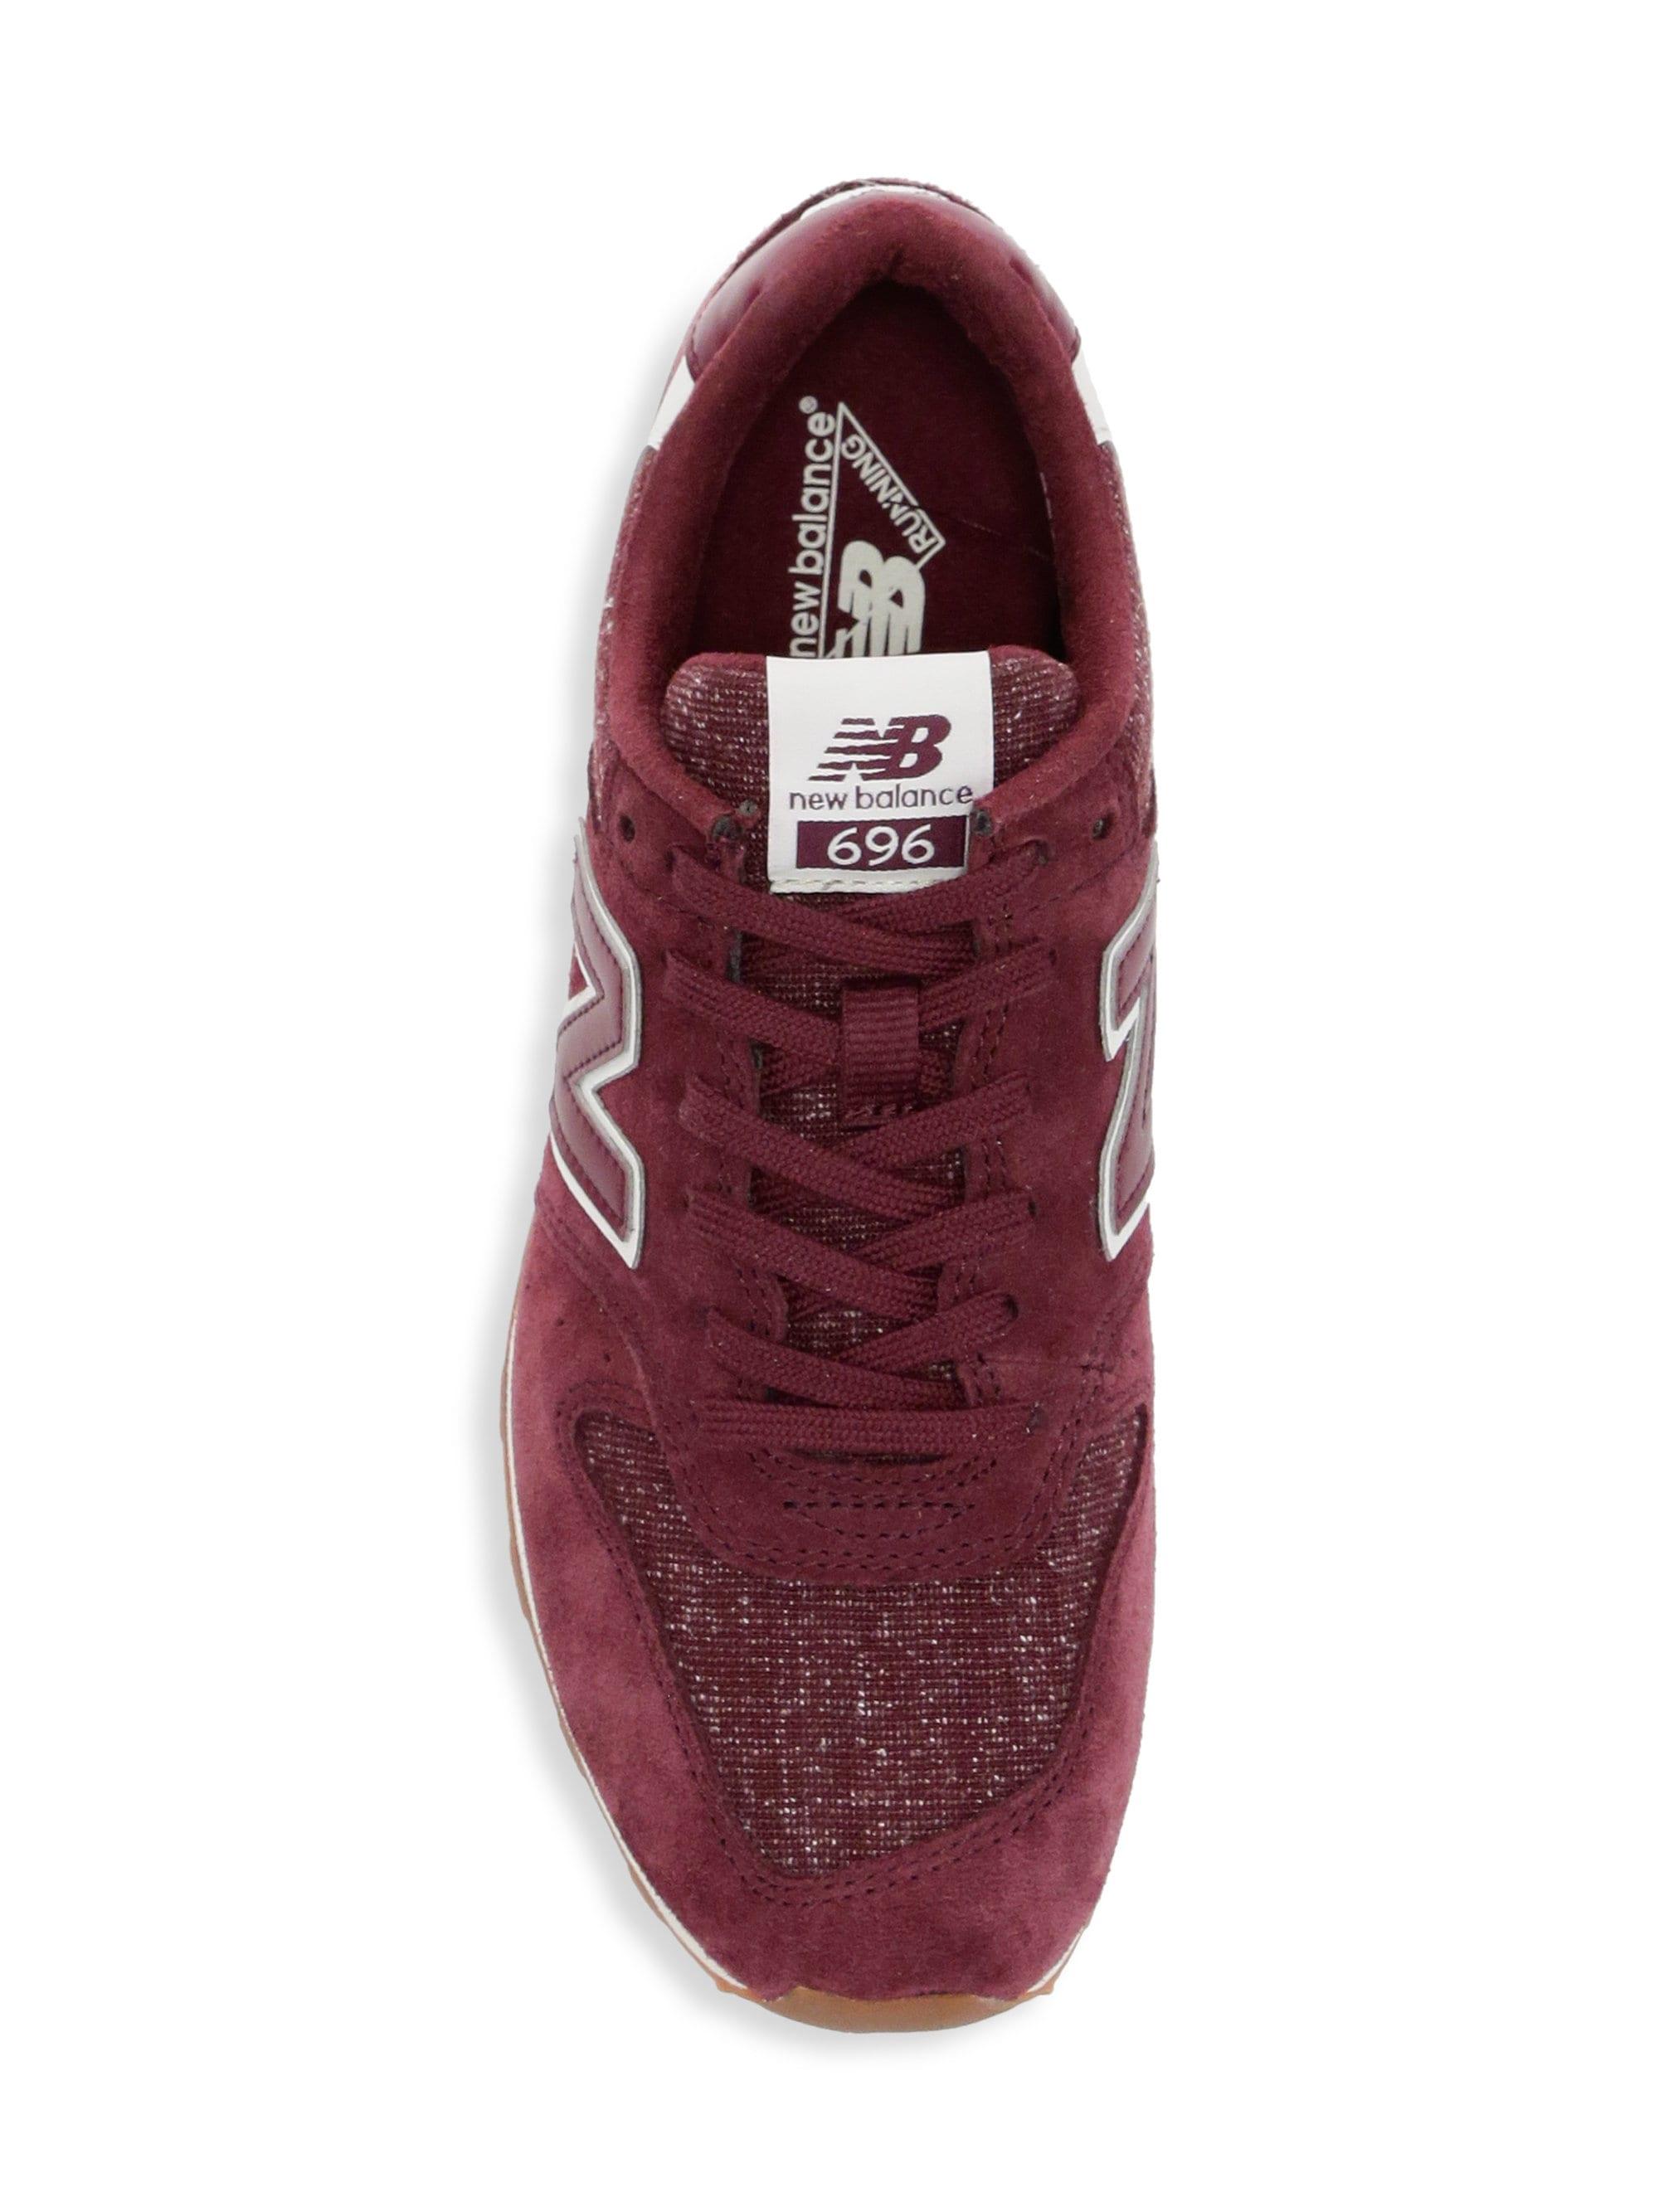 New Balance Women's Commercial 696 Suede Knit Sneakers - Burgundy in Purple  - Lyst